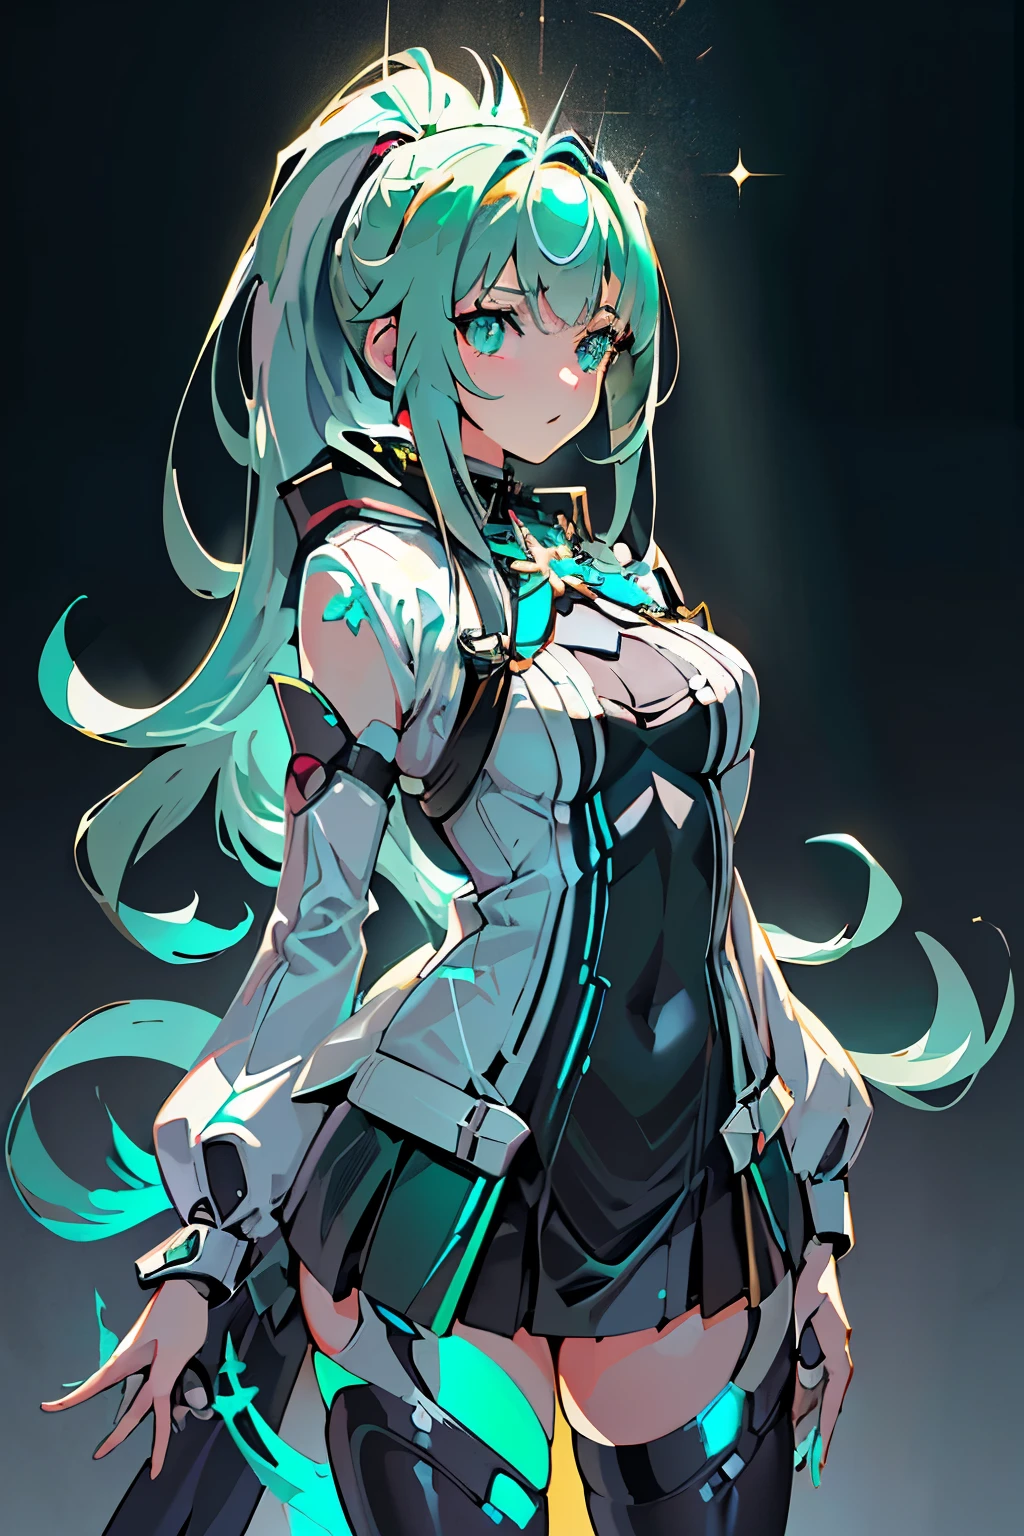 Anime, Girl, (((1girl))), (((Waifu, Xenoblade Chronicles 2, Pneuma Waifu))), Techwear, (((Seafoam Green Hair, Long Hair))), ((Seafoam Green Eyes eyes:1.3, Upturned Eyes: 1, Perfect Eyes, Beautiful Detailed Eyes, Gradient eyes: 1, Finely Detailed Beautiful Eyes: 1, Symmetrical Eyes: 1, Big Highlight On Eyes: 1.2, Hoshino Ai's Star Eyes)), (((Lustrous Skin: 1.5, Bright Skin: 1.5, Skin Fair, Shiny Skin, Very Shiny Skin, Shiny Body, Plastic Glitter Skin, Exaggerated Shiny Skin, Illuminated Skin))), (Detailed Body, (Detailed Face)), Young, Idol Pose, (Best Quality), Shirt, Loose Skirt, Stockings, Garterbelt, Modest Clothing, Skin Covered, Cute Disposition, High Resolution, Sharp Focus, Ultra Detailed, Extremely Detailed, Extremely High Quality Artwork, (Realistic, Photorealistic: 1.37), 8k_Wallpaper, (Extremely Detailed CG 8k), (Very Fine 8K CG), ((Hyper Super Ultra Detailed Perfect Piece)), (((Flawlessmasterpiece))), Illustration, Vibrant Colors, (Intricate), High Contrast, Selective Lighting, Double Exposure, HDR (High Dynamic Range), Post-processing, Background Blur